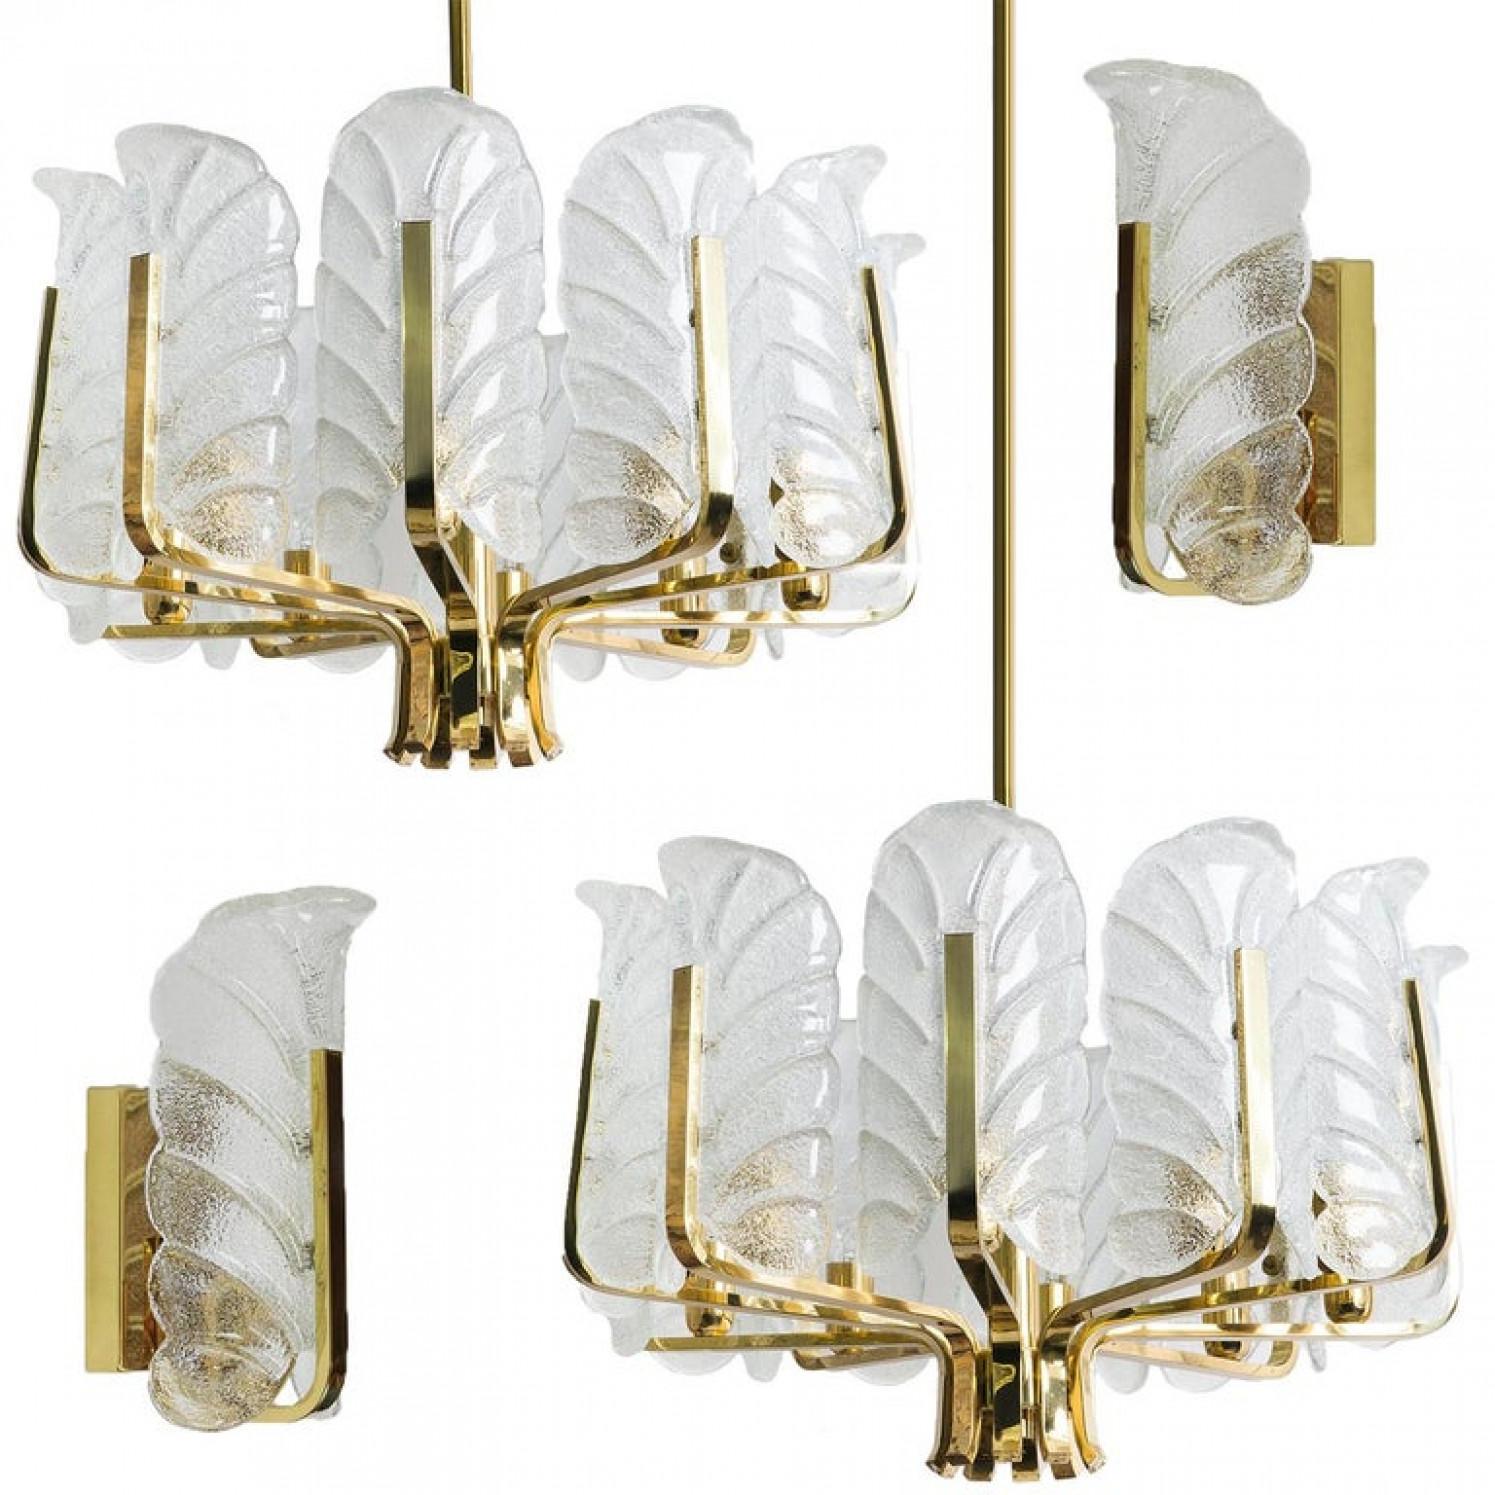 This beautifully and stunning pendant chandelier with ten glass shades and brass fittings was produced in the 1960s by the iconic firm of Orrefors and designed by Carl Fagerlund. Beautifully carved clear frosted glass shades in a leaf design on